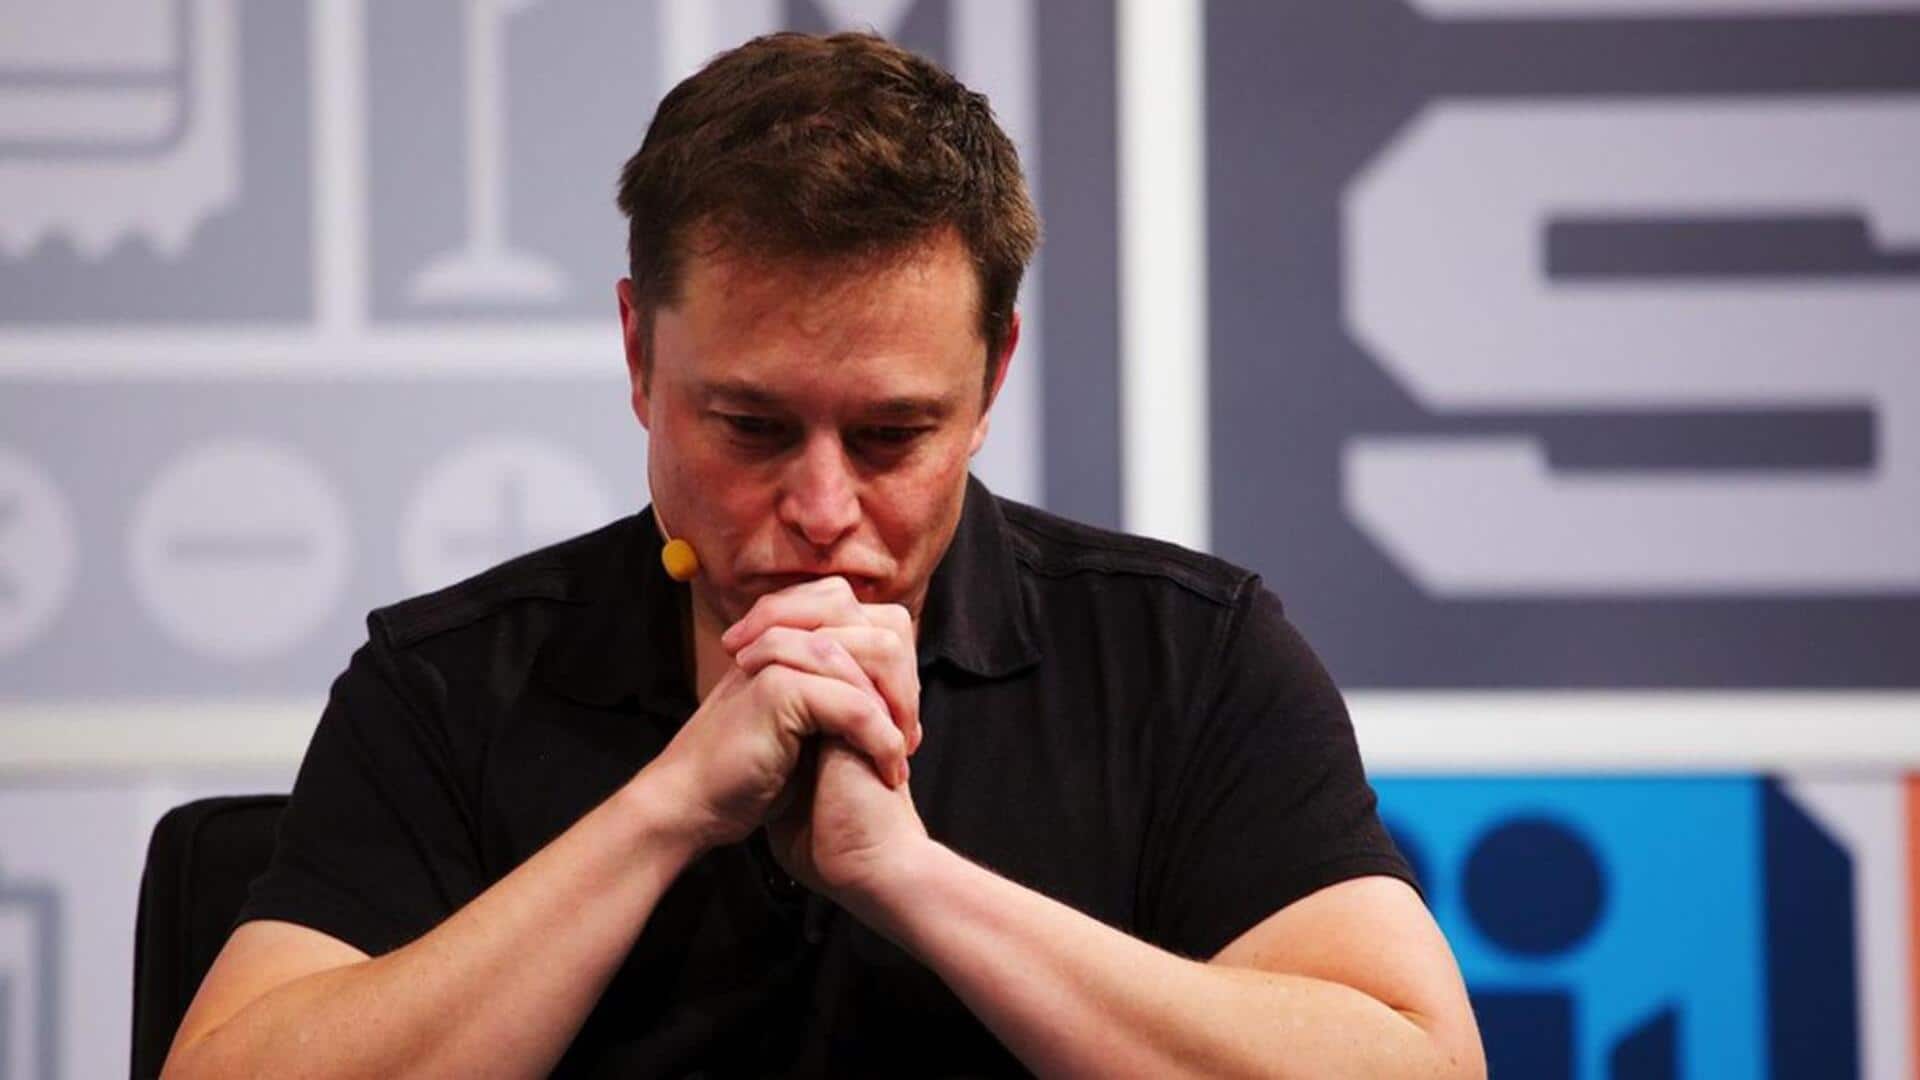 Norway's sovereign wealth fund opposes Musk's $56bn Tesla pay deal